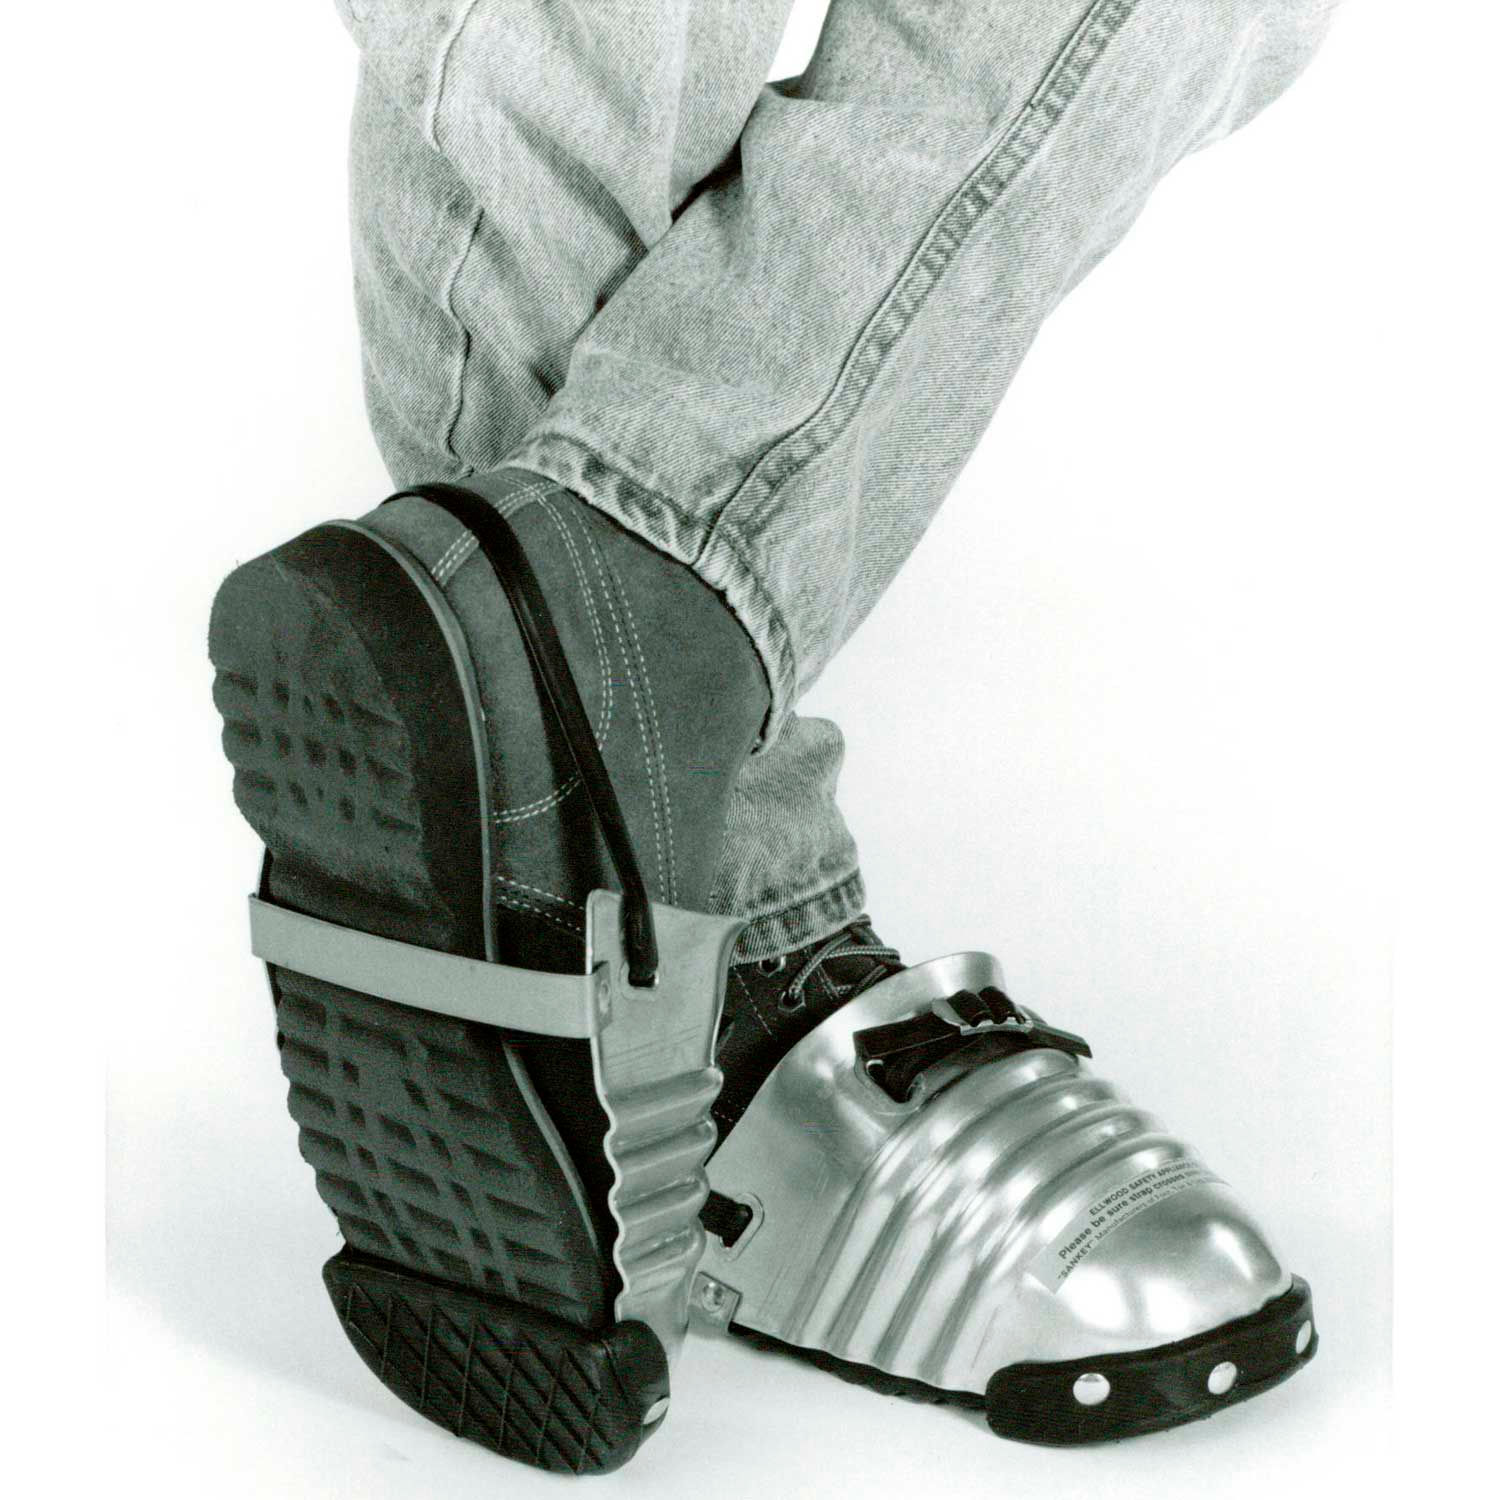 steel toe protectors for shoes